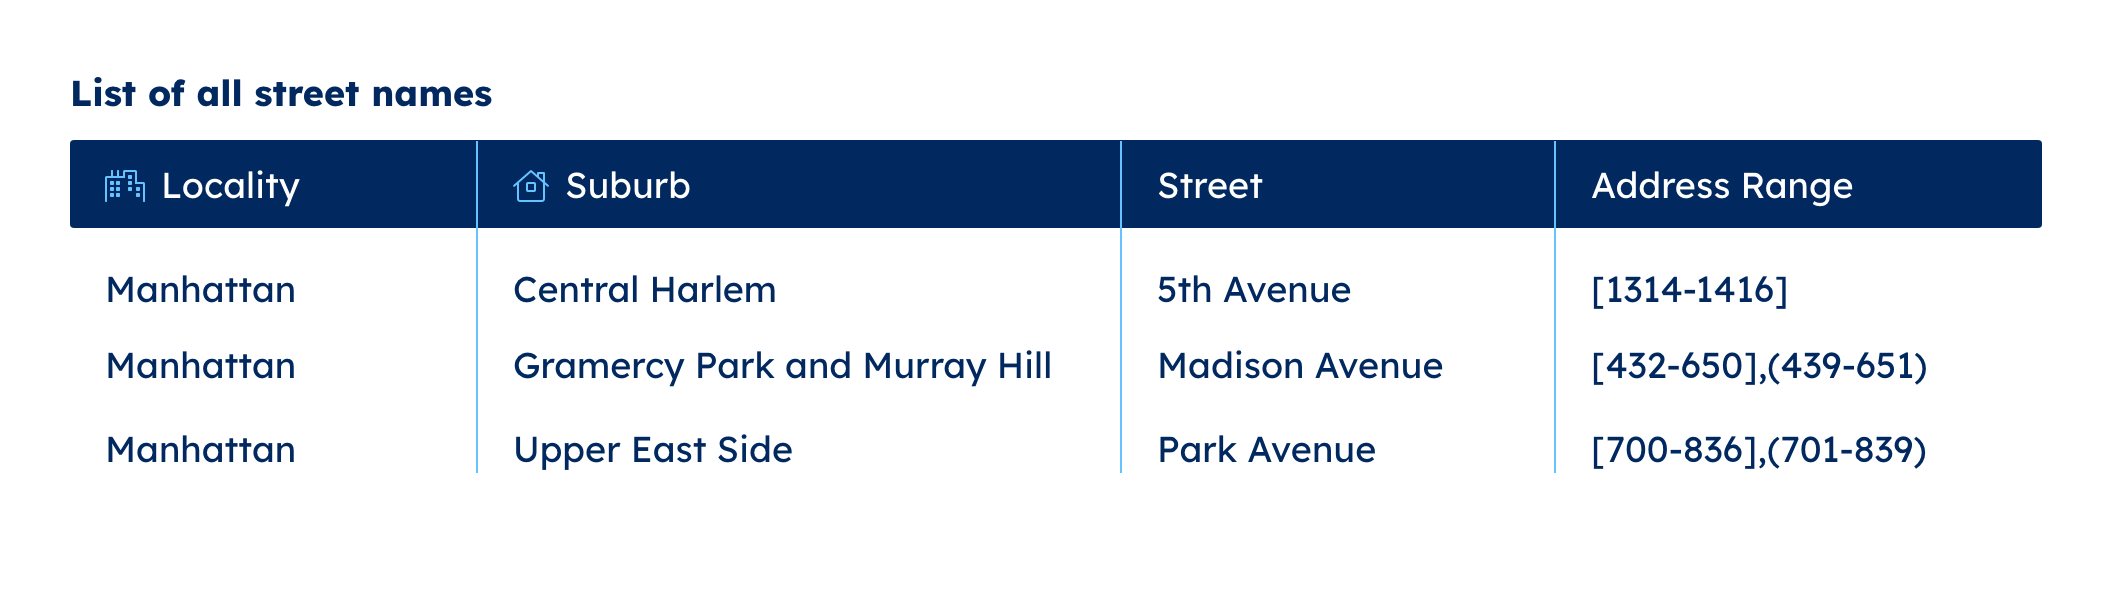 List of all street names